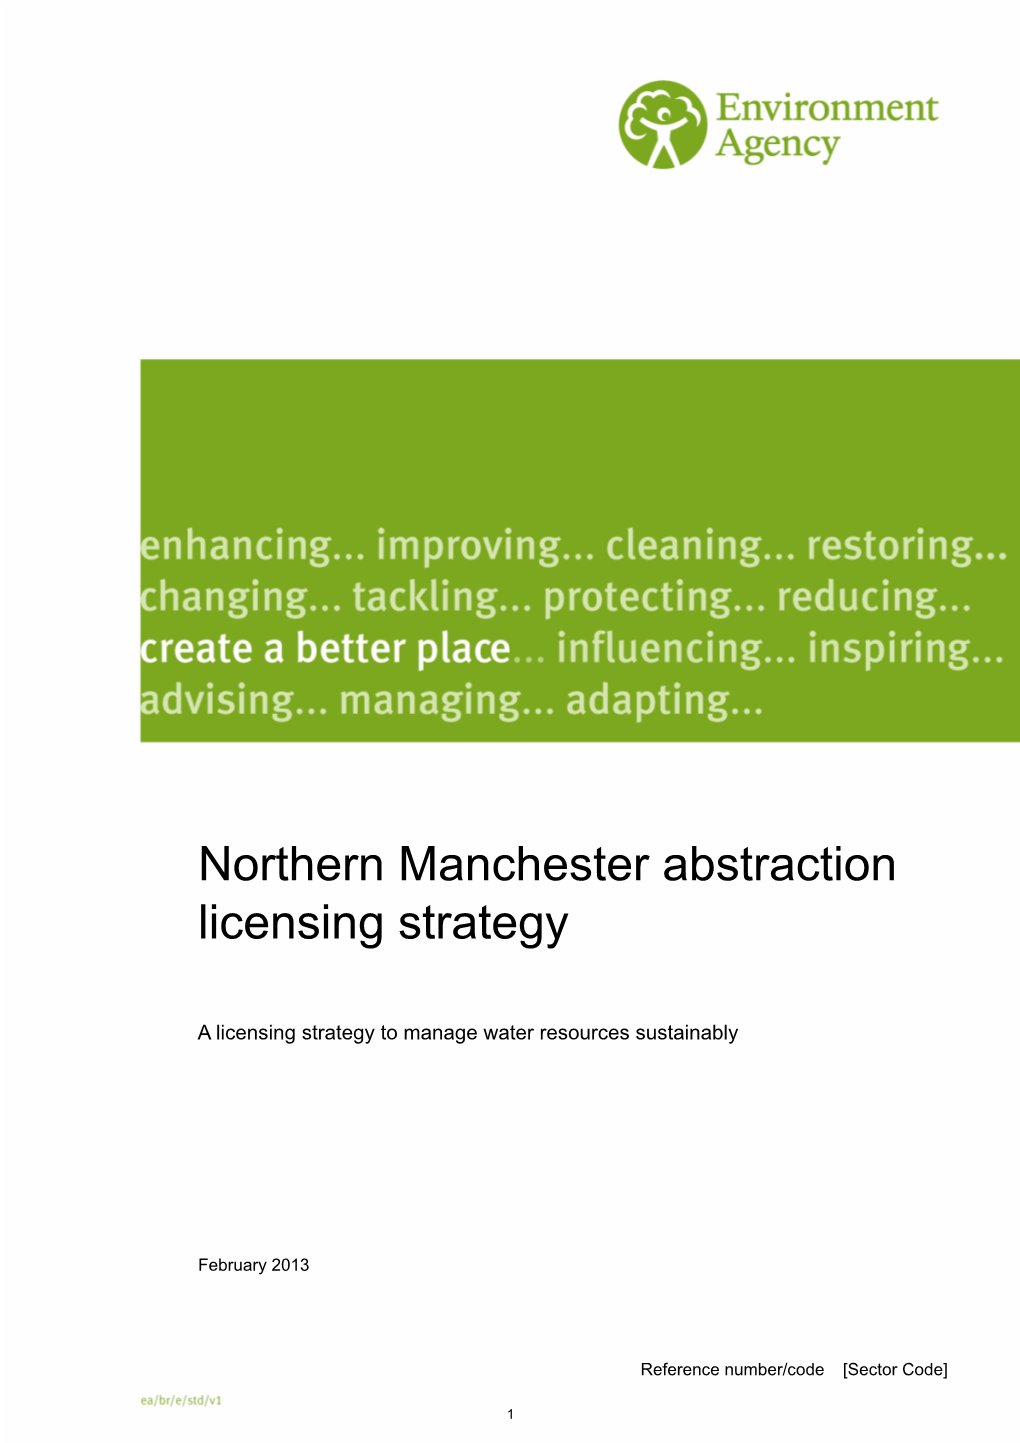 Northern Manchester Abstraction Licensing Strategy